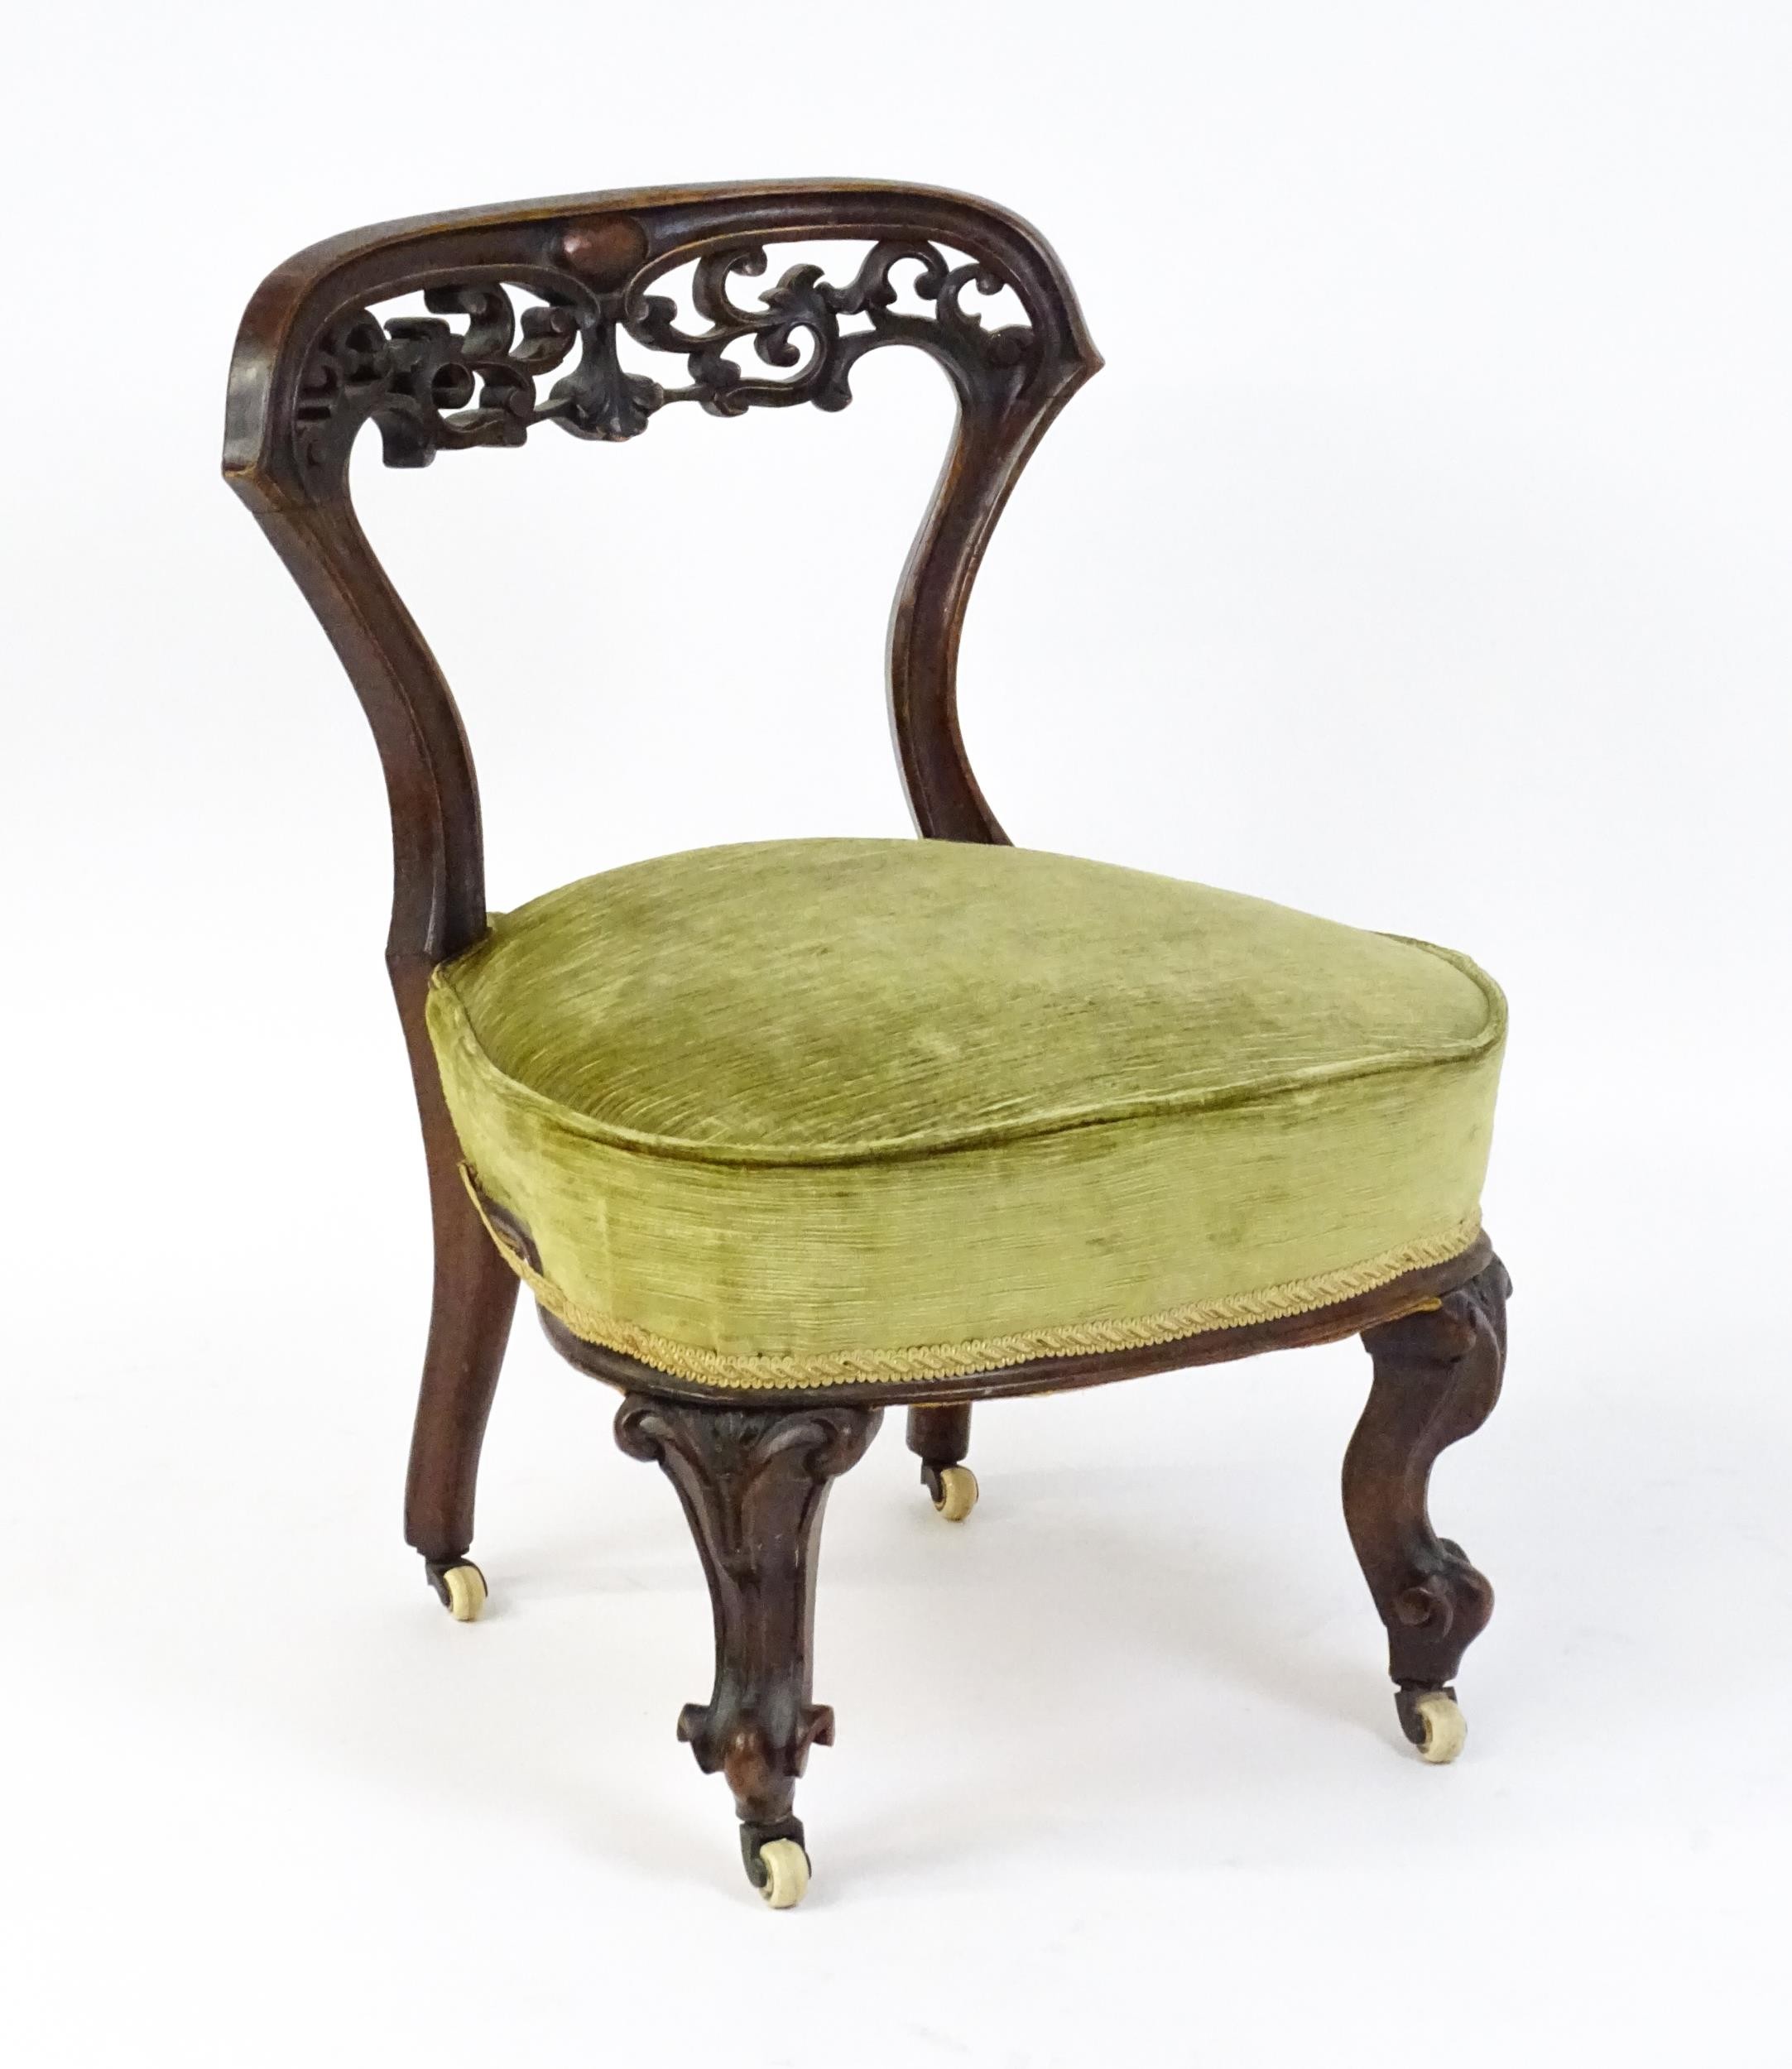 A mid / late 19thC mahogany nursing chair with a pierced, carved floral top rail above moulded